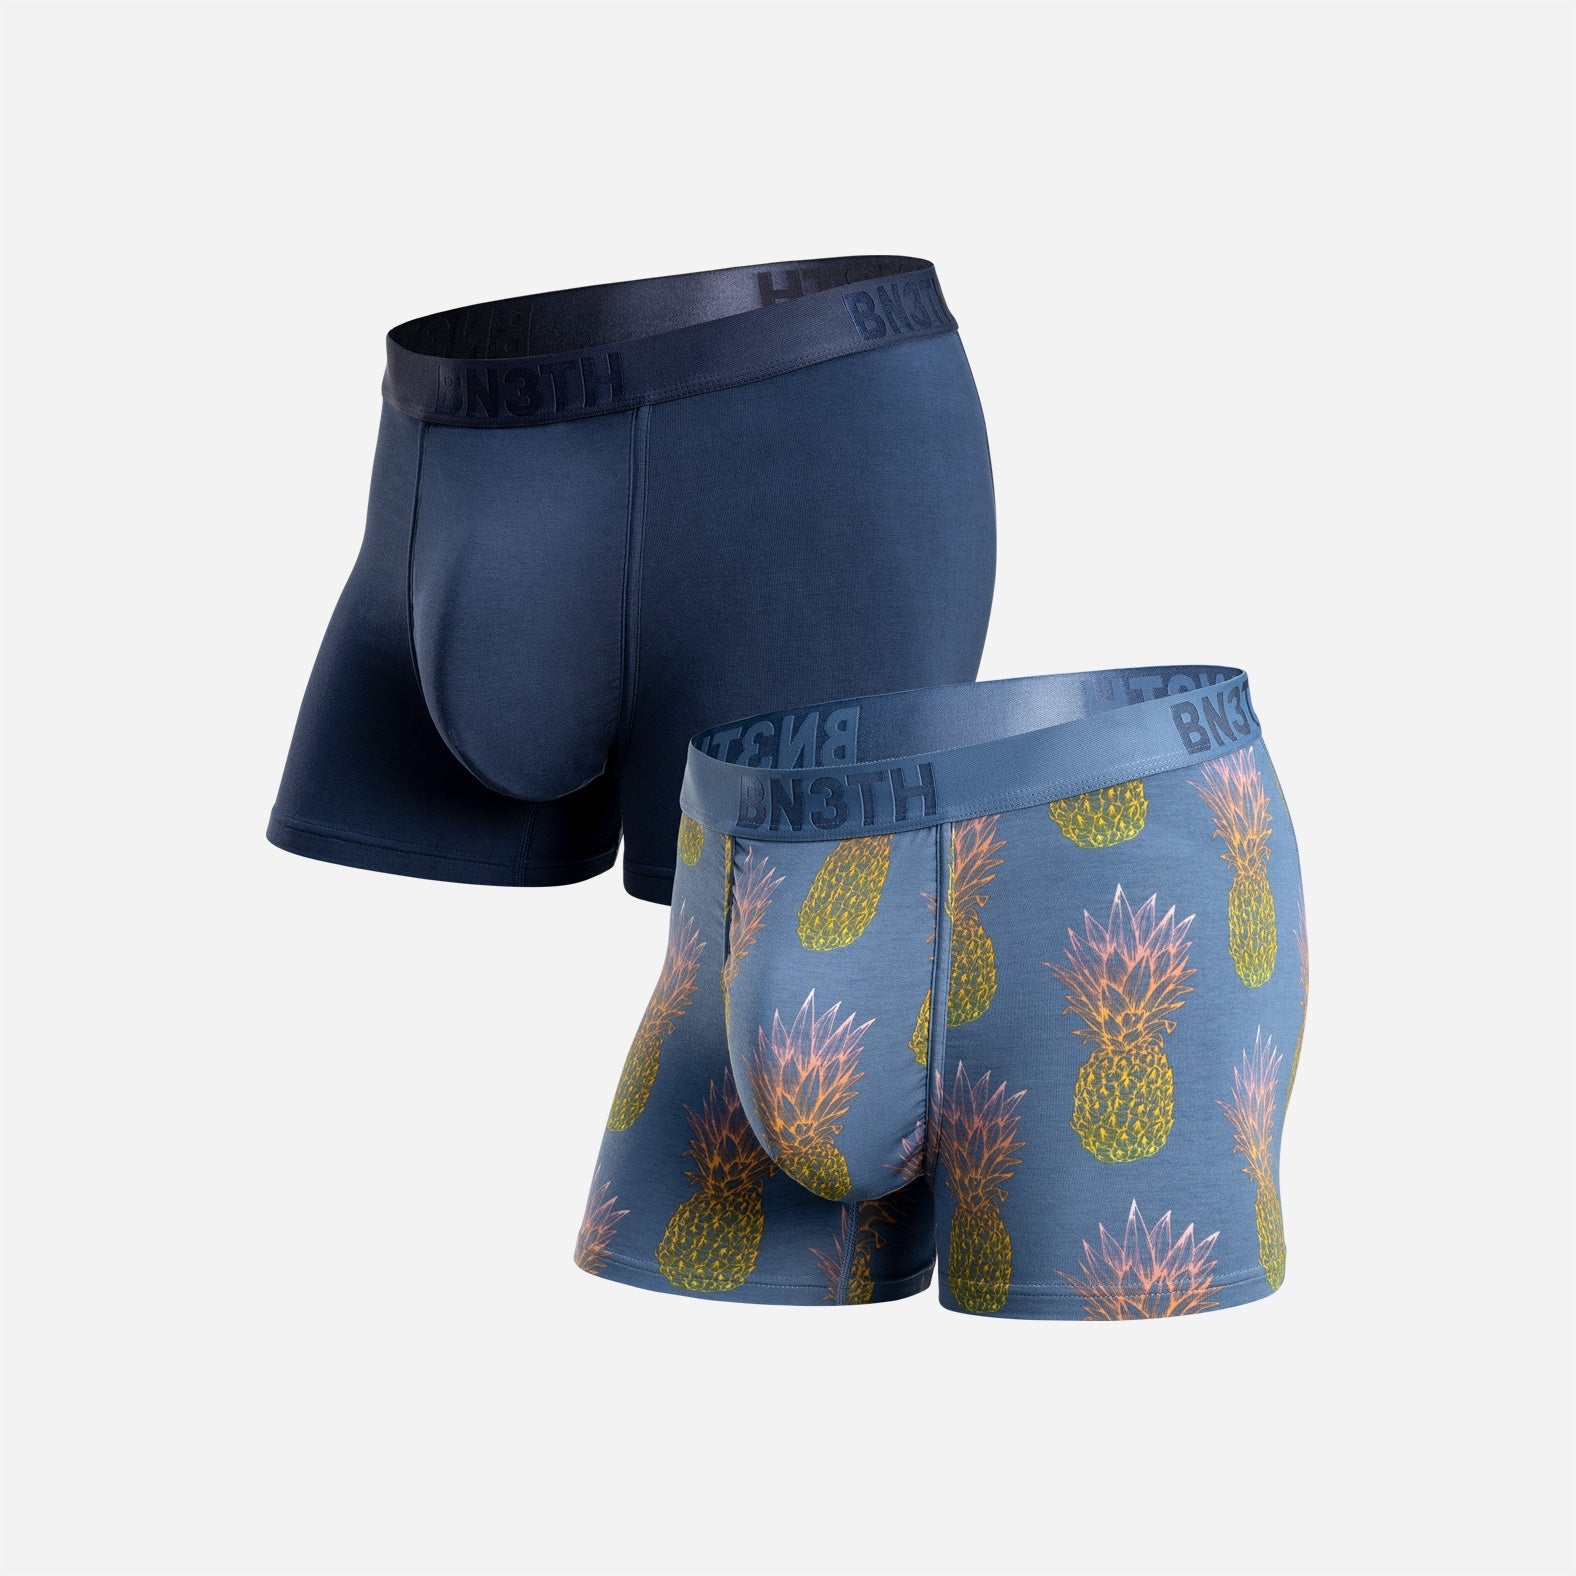 CLASSIC TRUNK: NAVY/PINEAPPLE FADE FOG 2 PACK